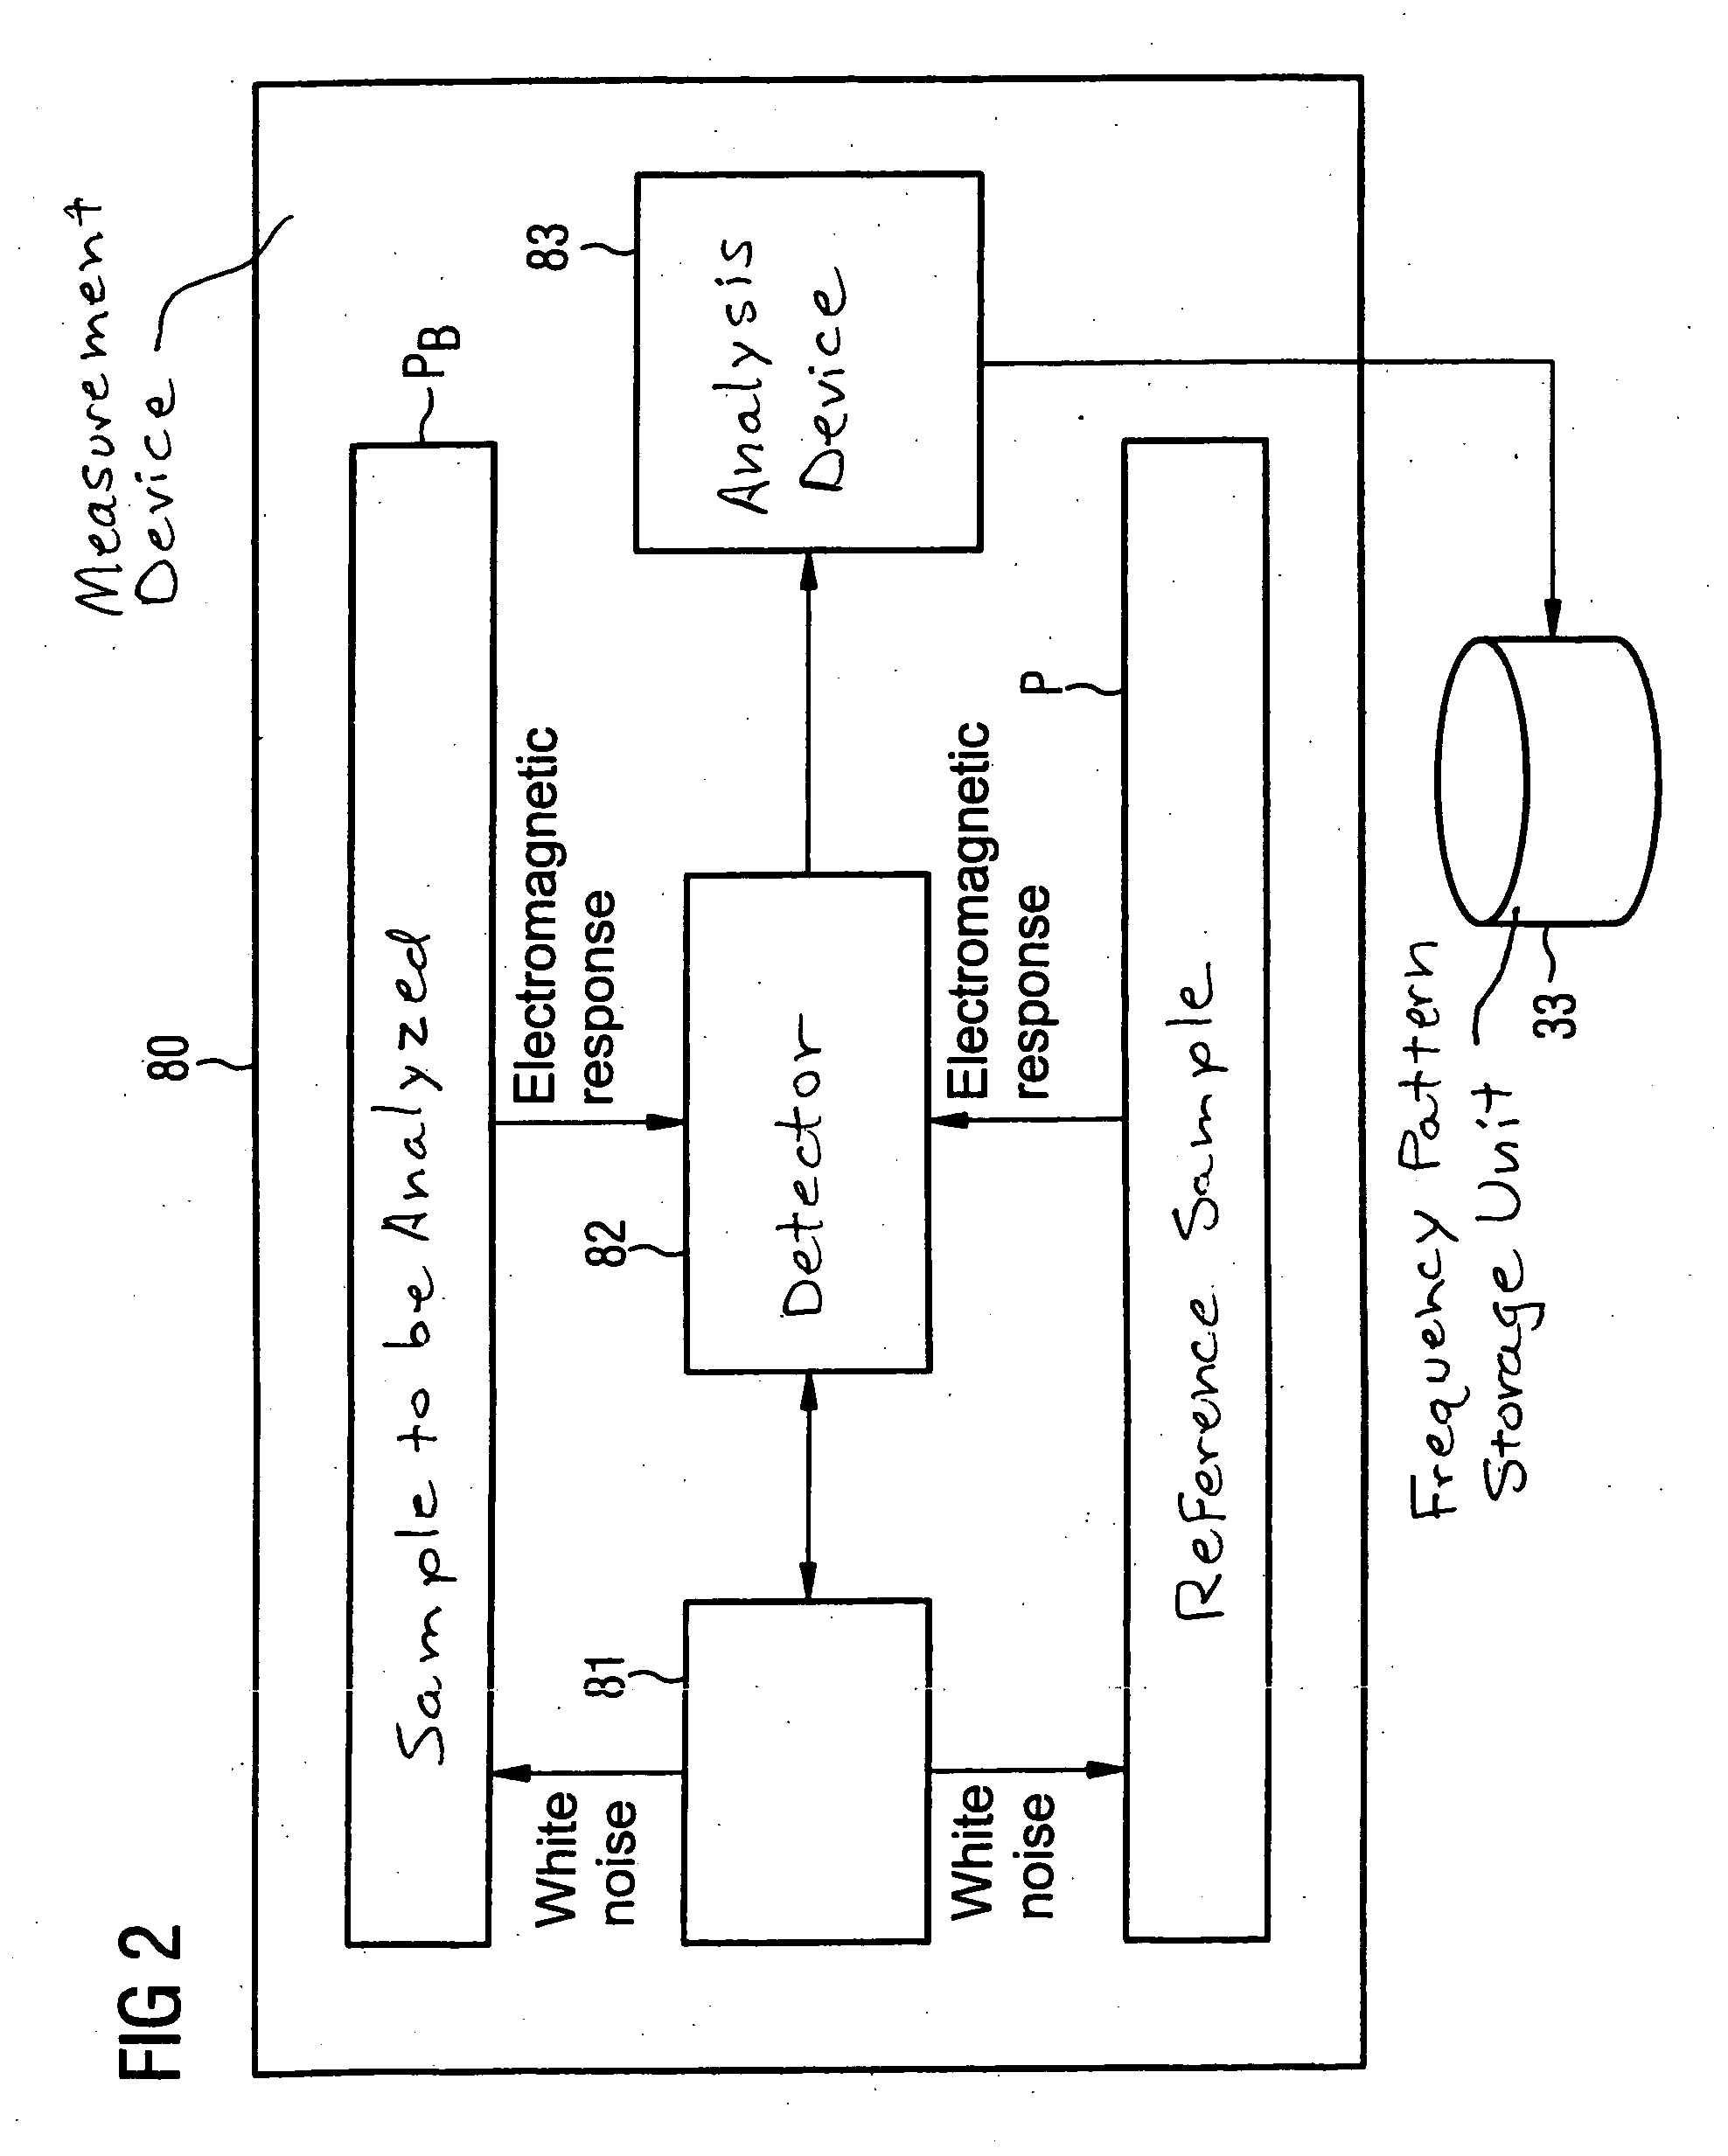 Irradiation device for influencing a biological structure in a subject with electromagnetic radiation